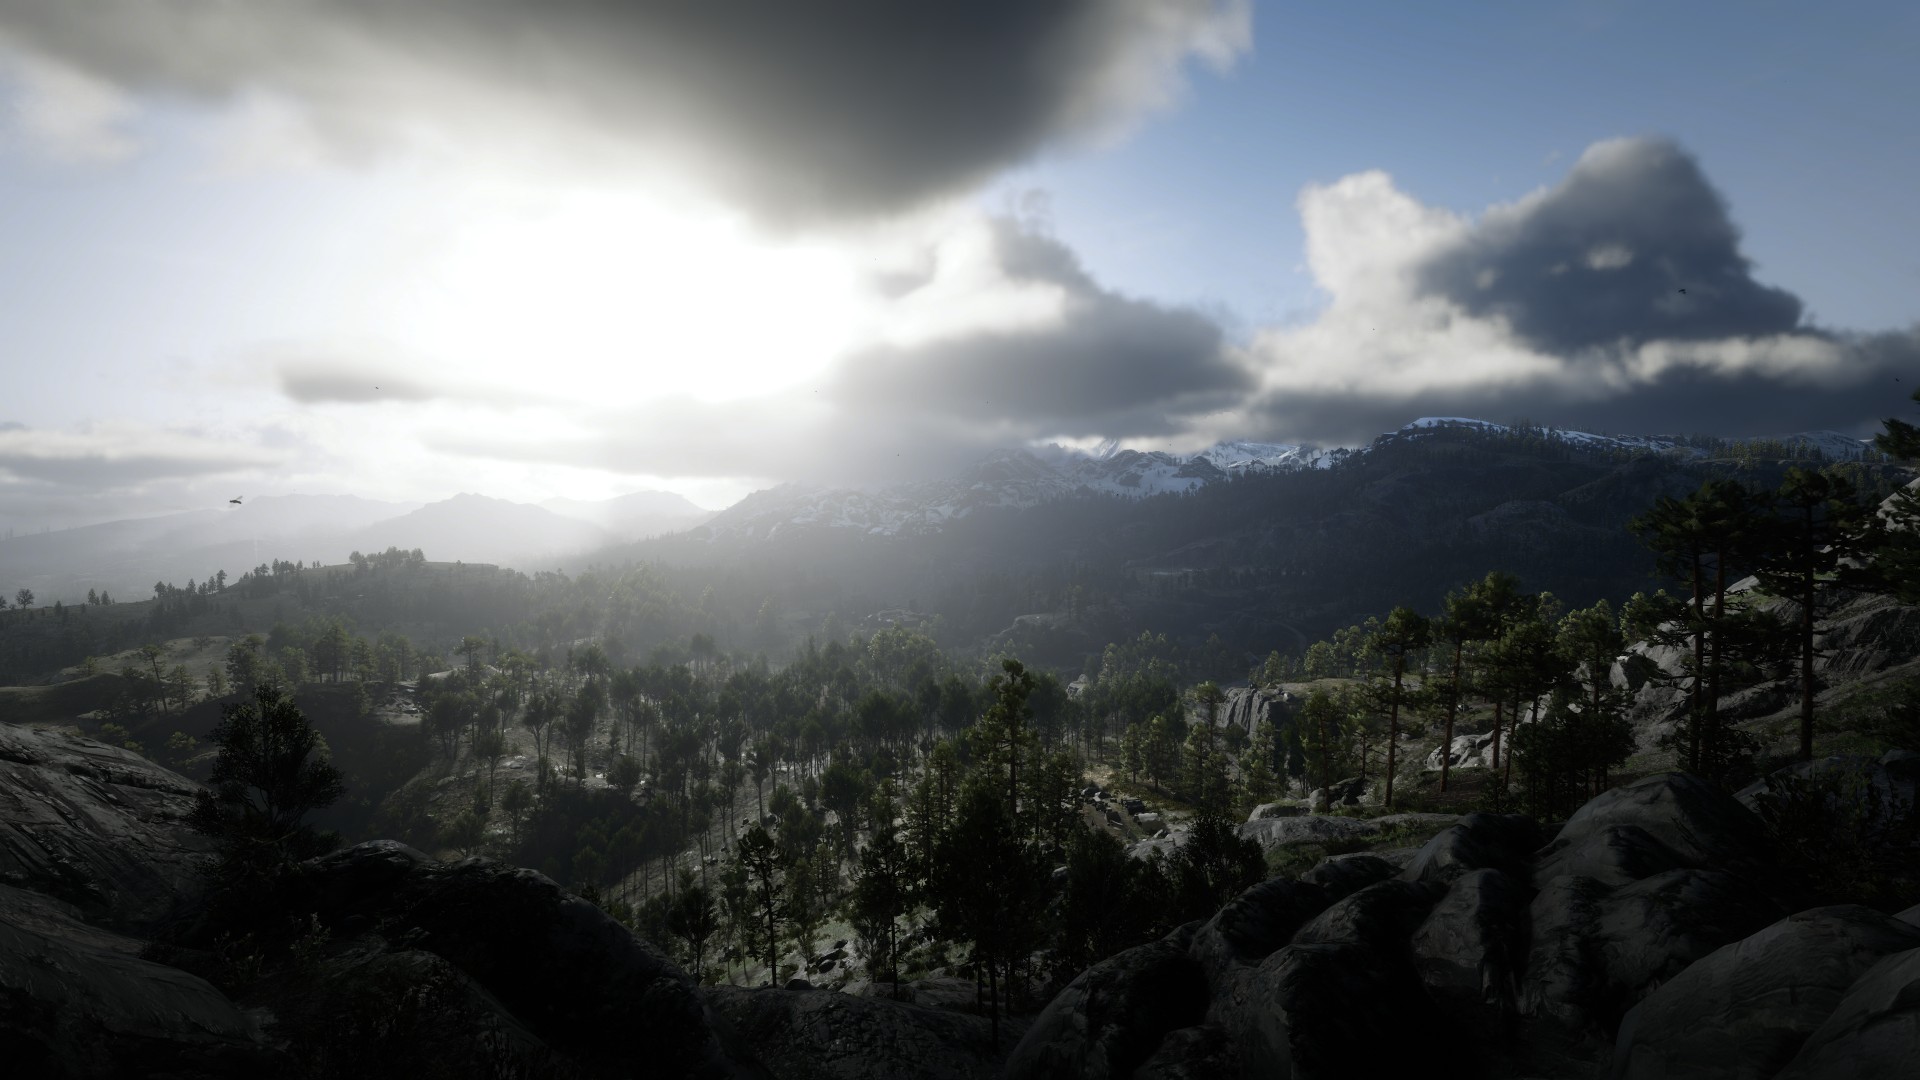 General 1920x1080 Red Dead Redemption 2 nature screen shot PC gaming forest mountain pass